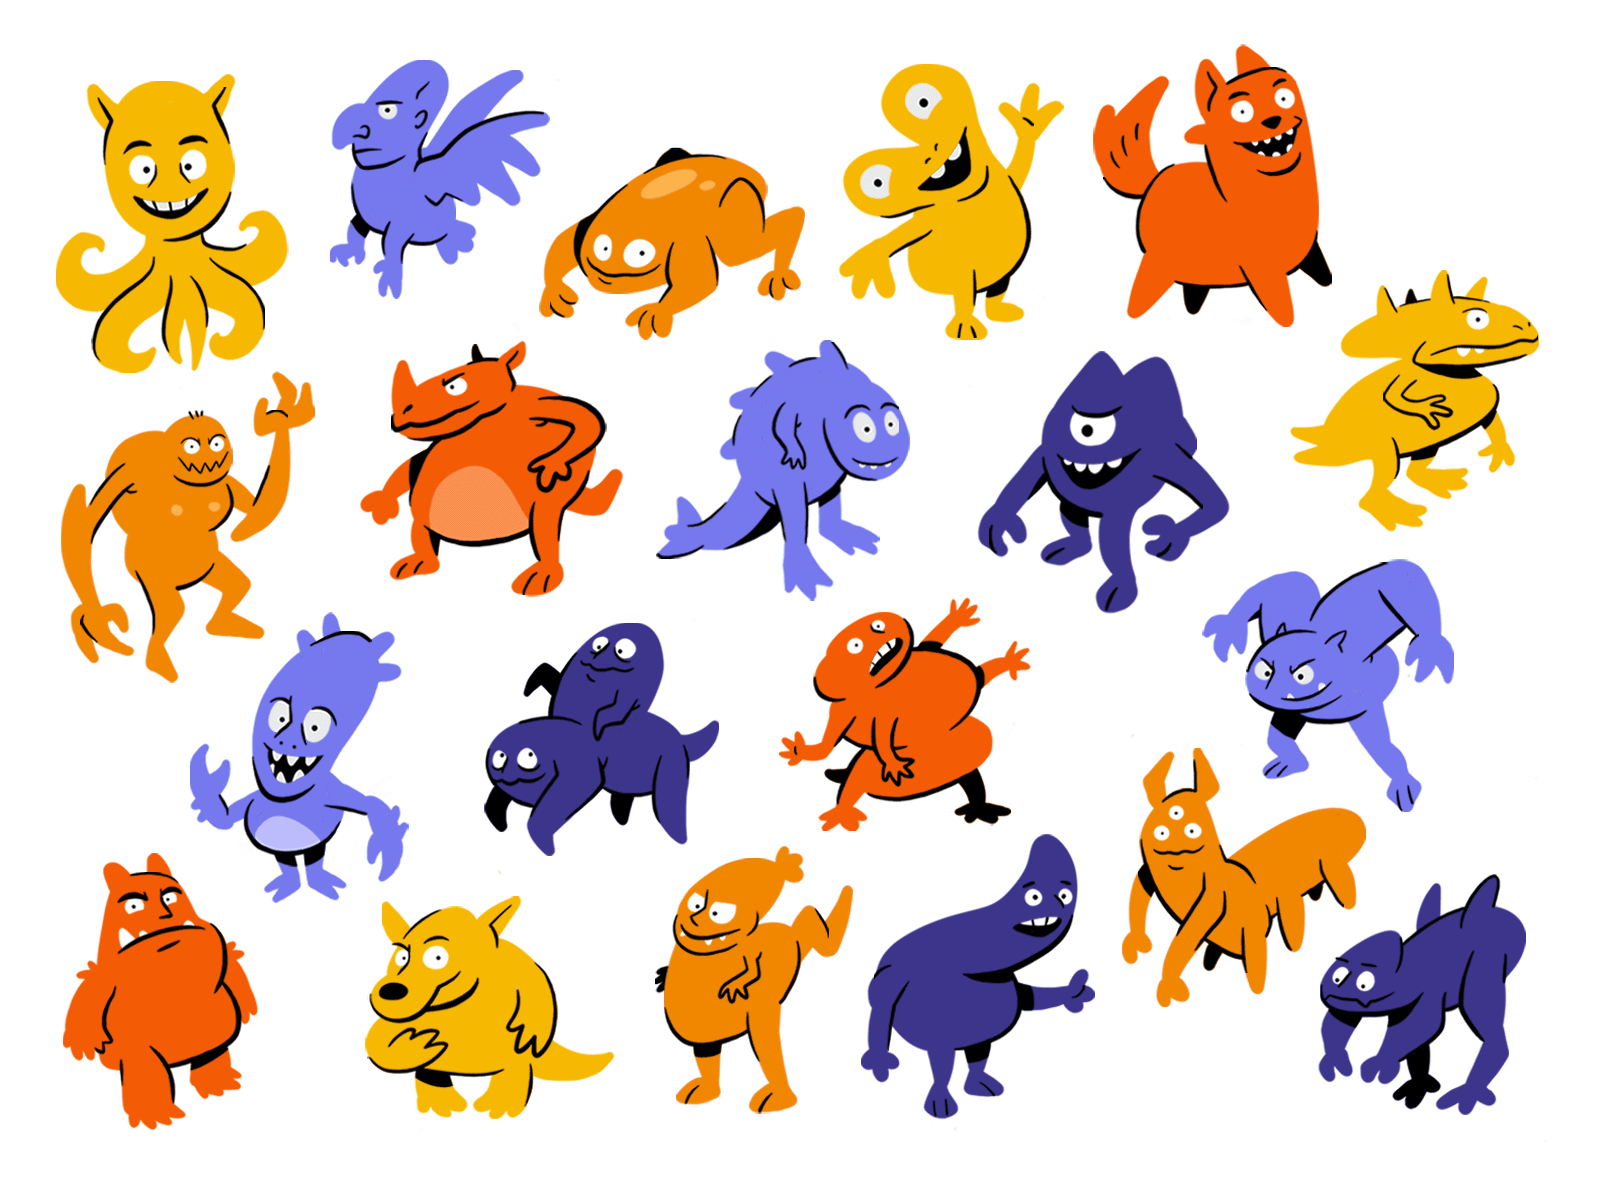 The Experi-Men: Set 2 animated animated gif boston character animation character design characterdesign concept art creative design creature design drawing drawing challenge funny gif illustration monster monsters orange process procreate silhouette